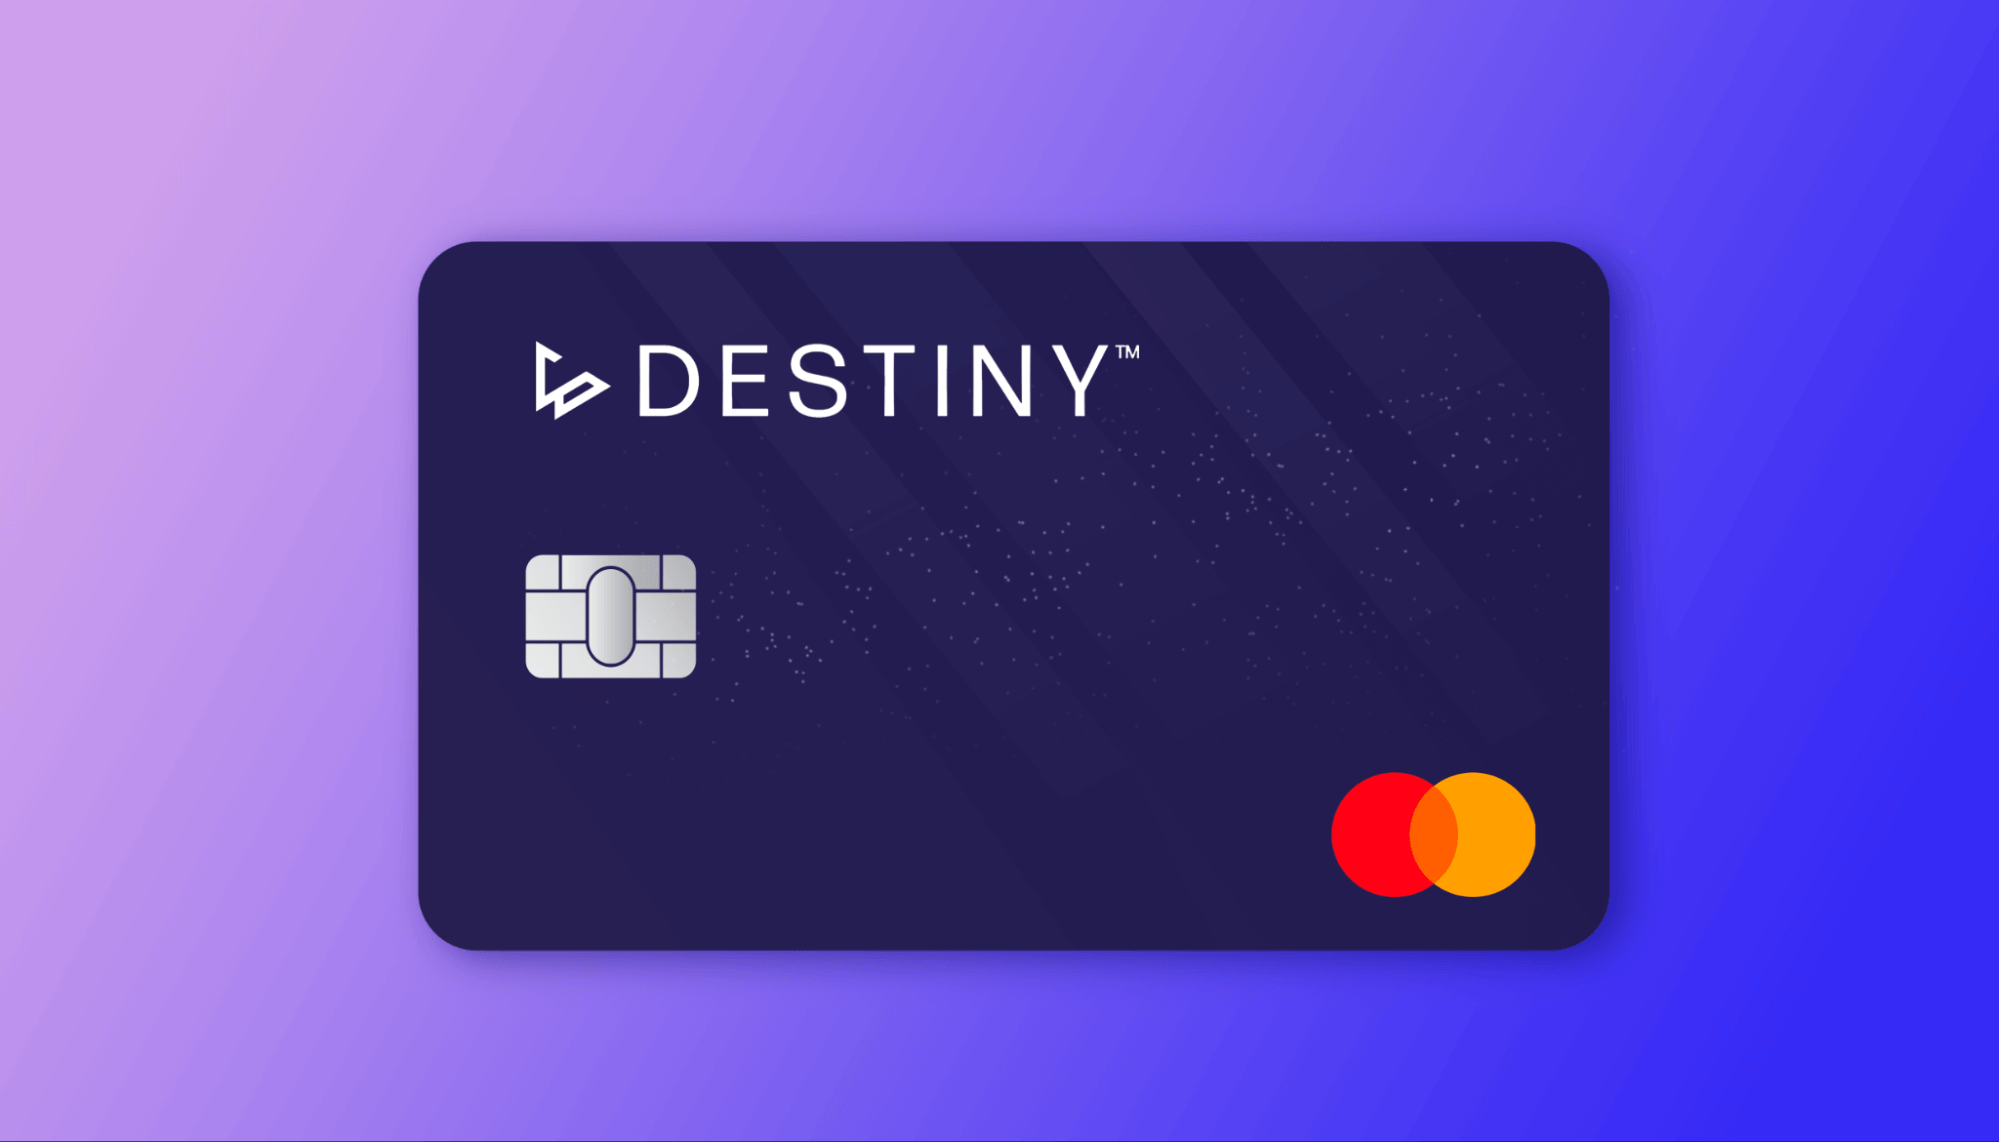 Destiny Mastercard: Discover how to apply for this smart choice for credit building